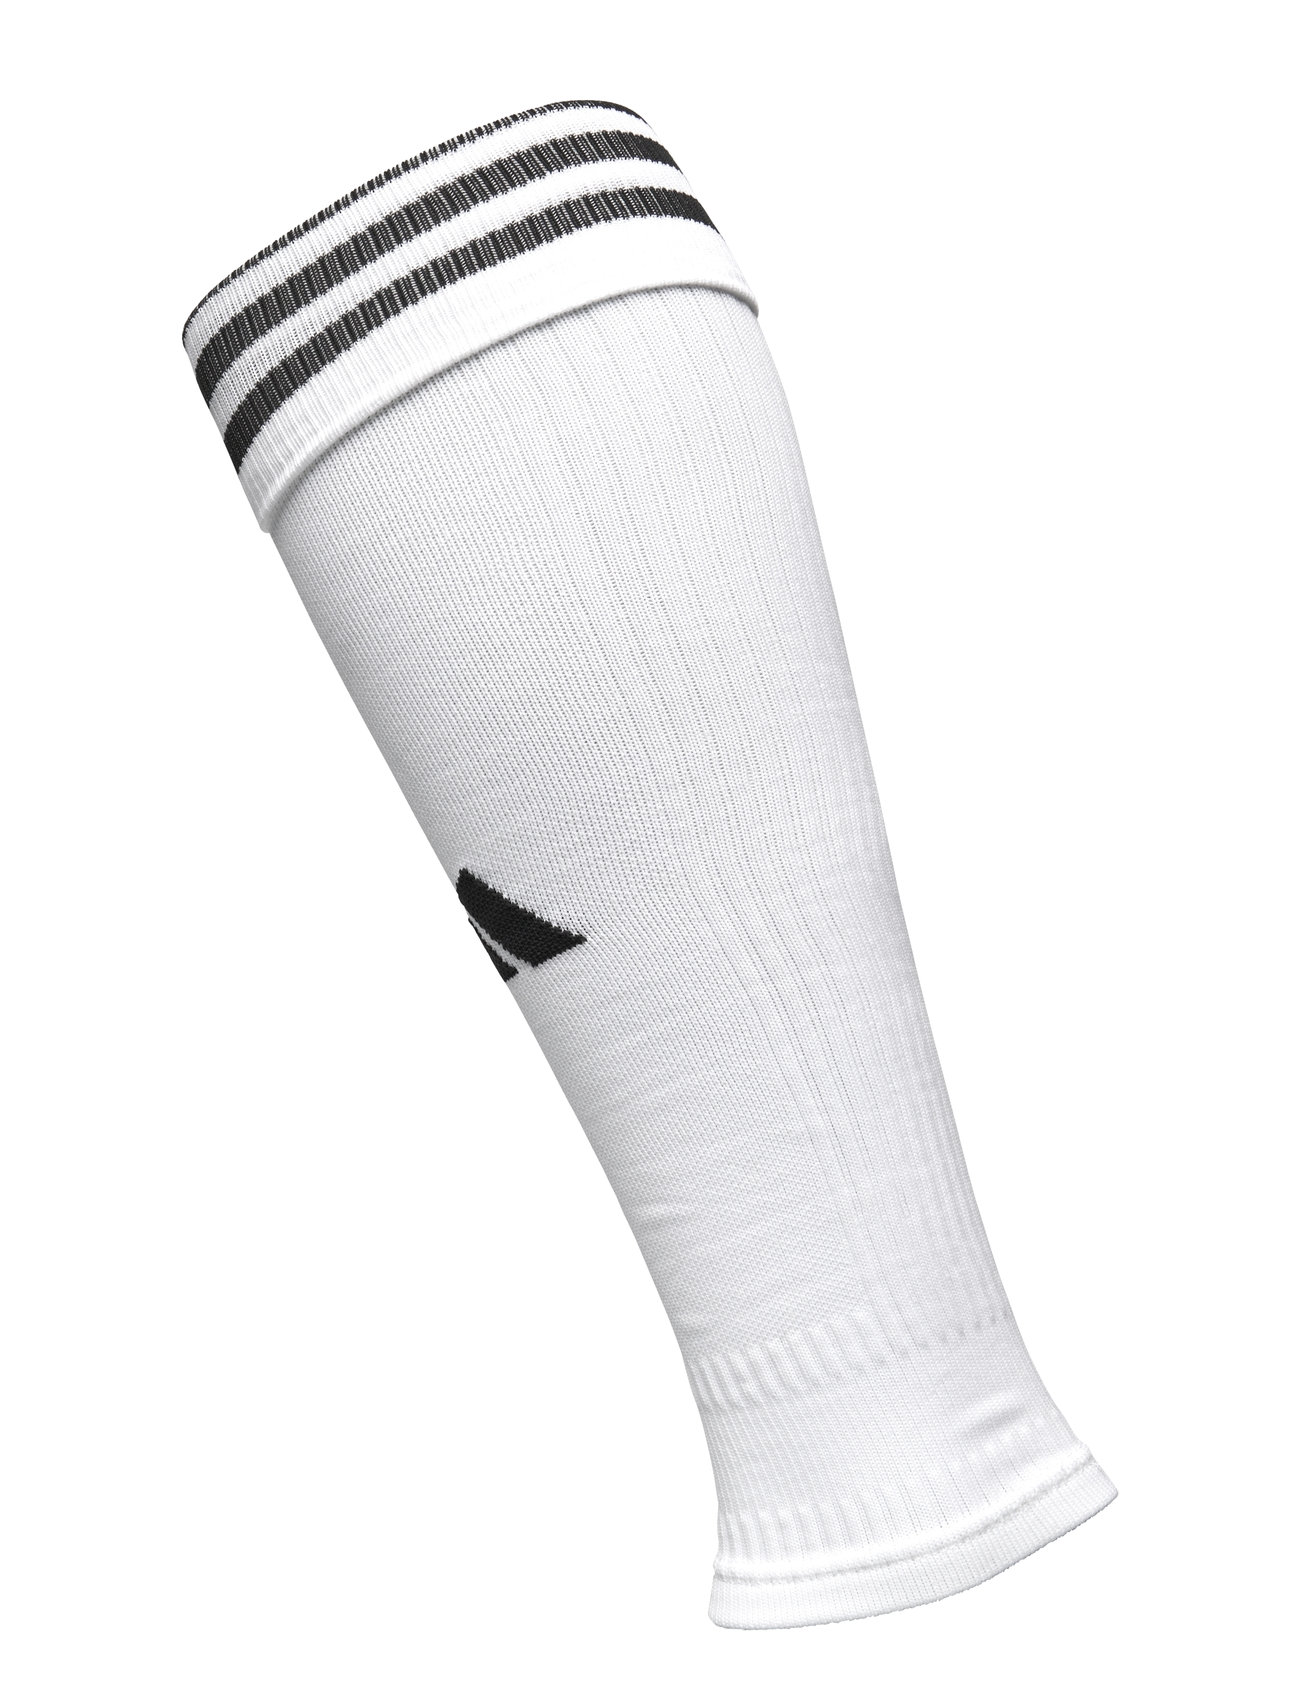 adidas Copa Soccer Calf Sleeve (2-Pieces) to be Worn Over Guards